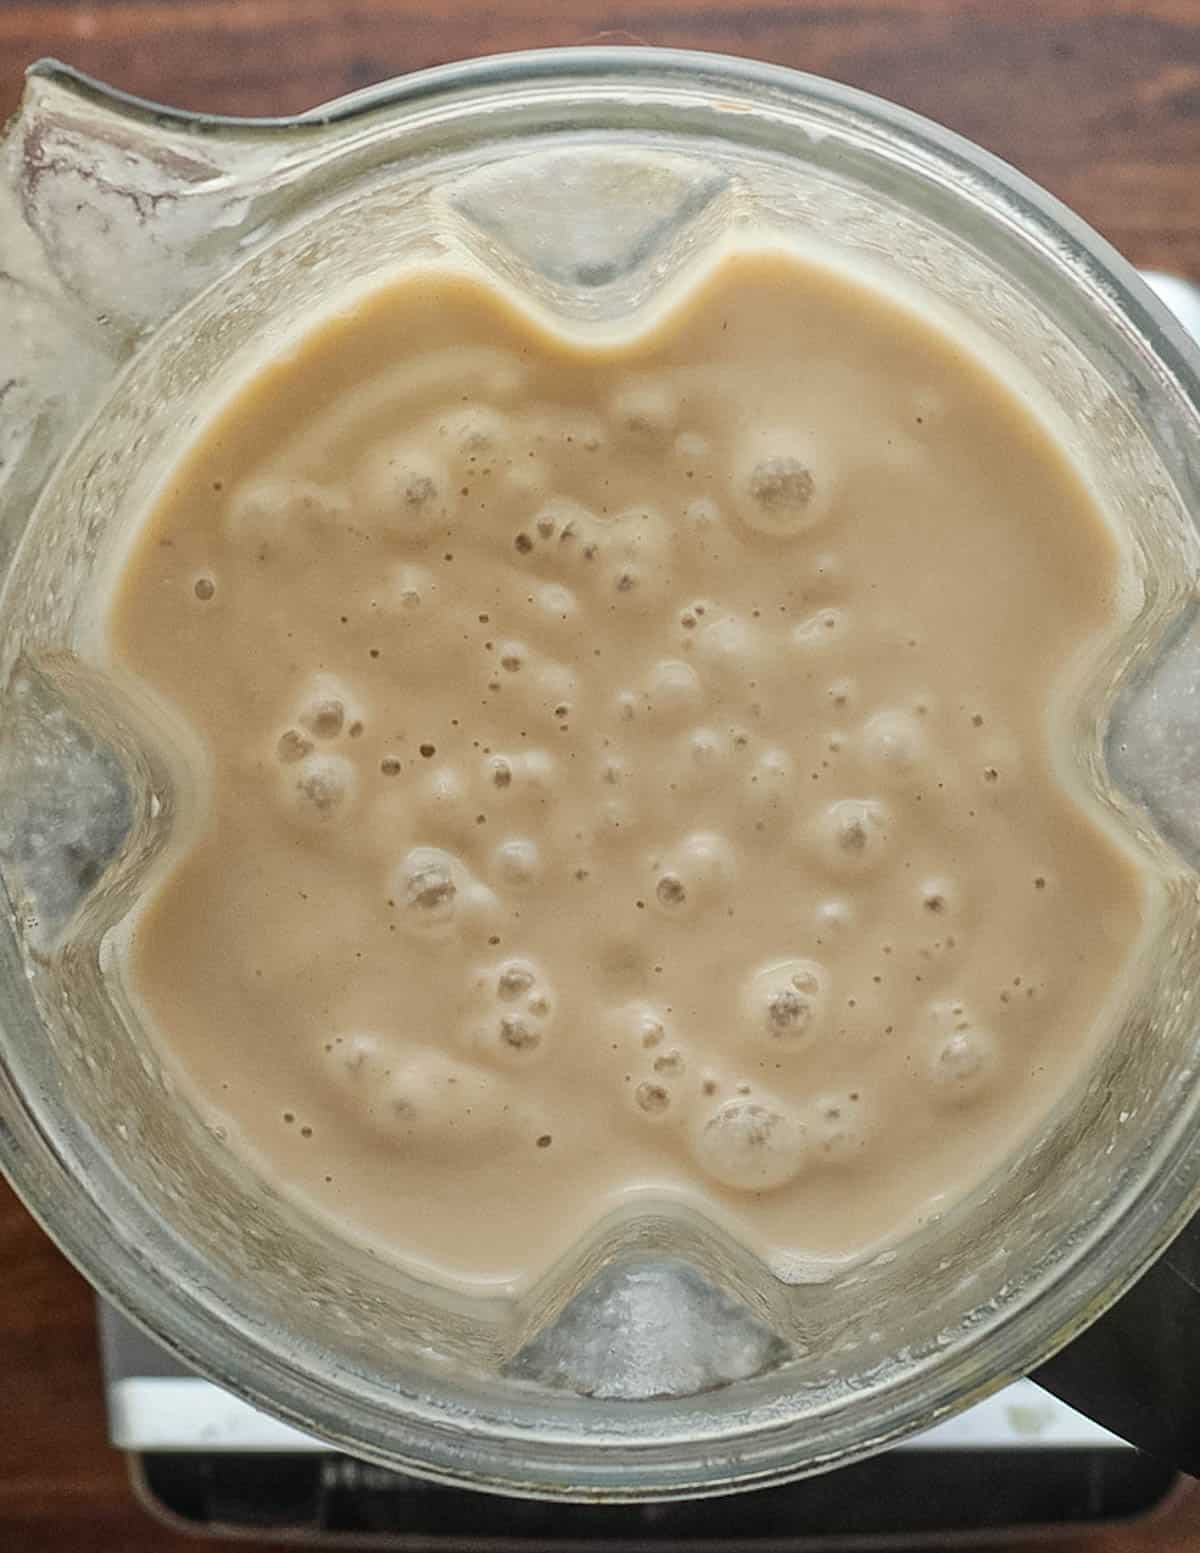 A top down image of a blender filled with pureed chestnut soup.